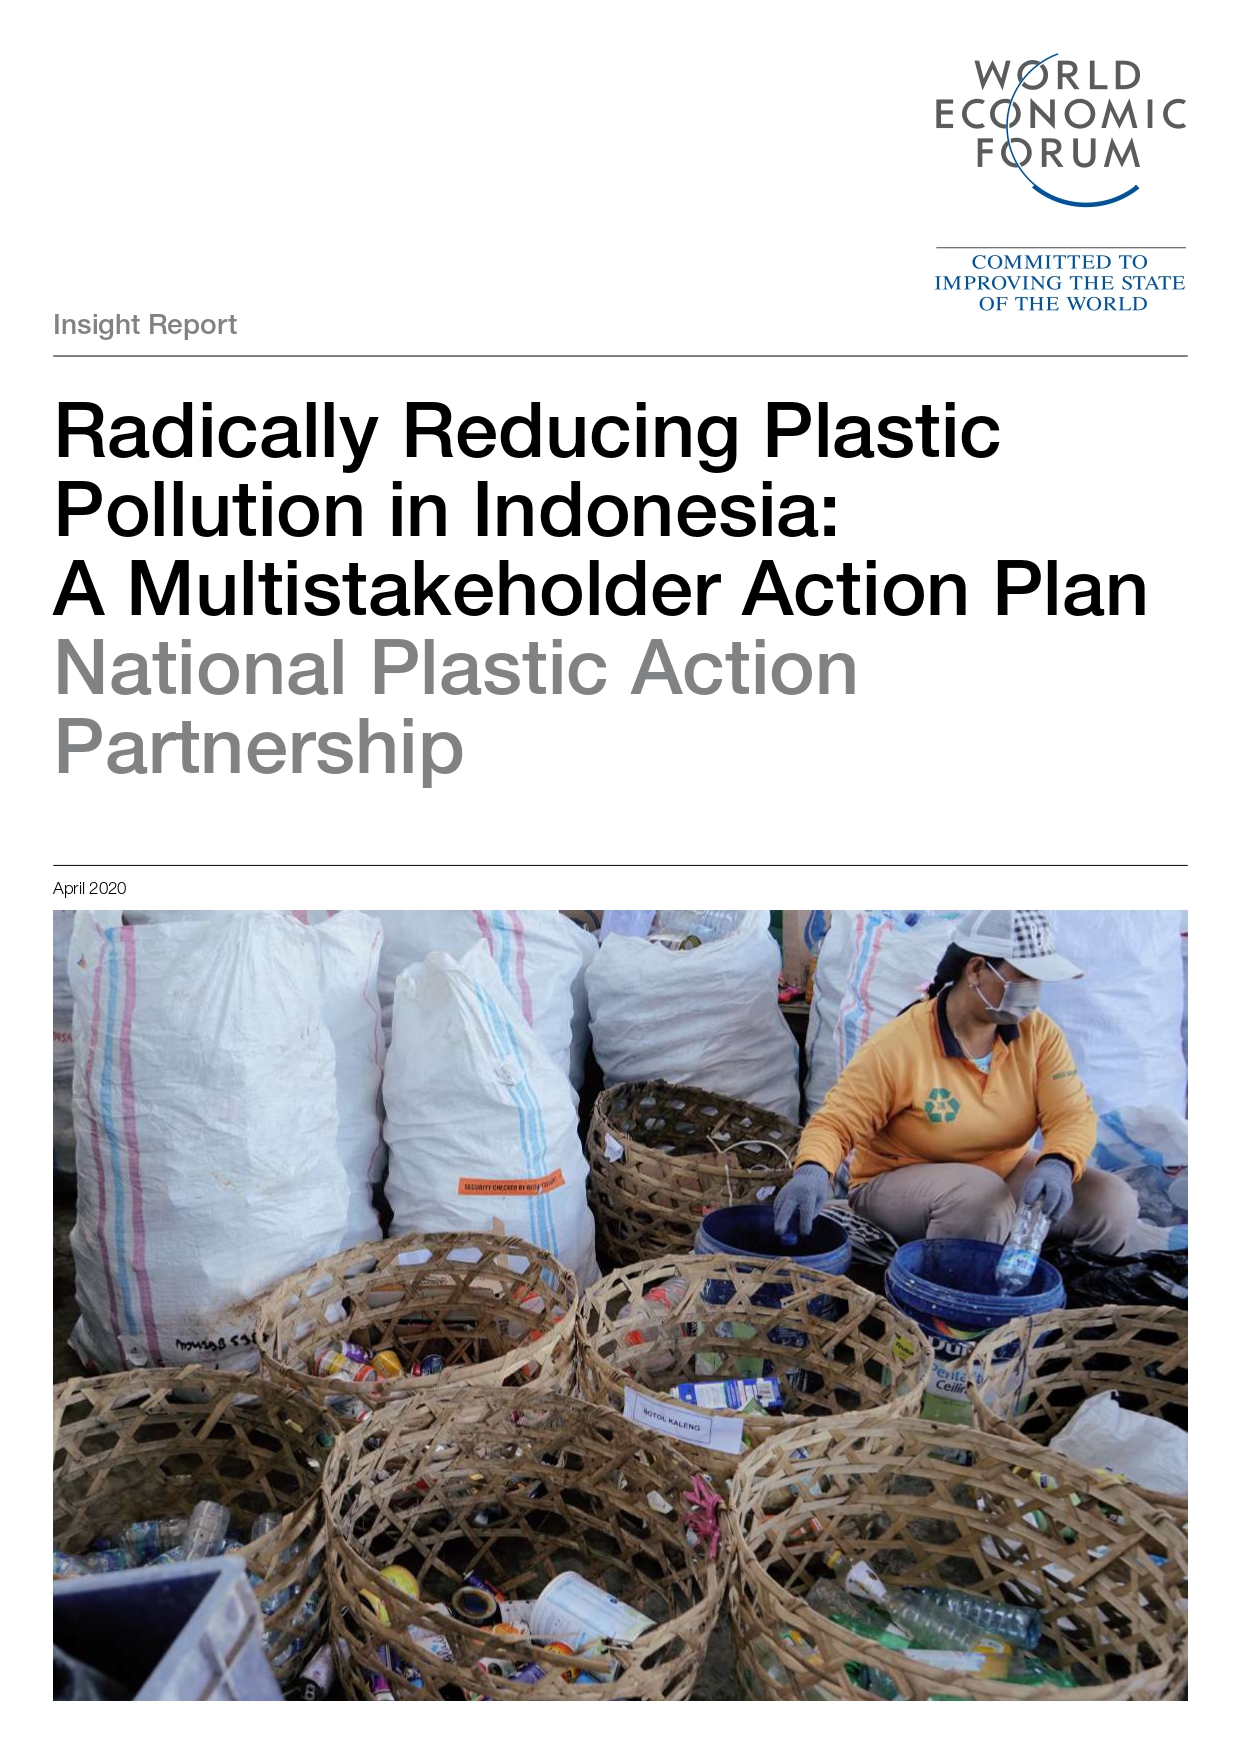 Radically Reducing Plastic Pollution in Indonesia - April 2020